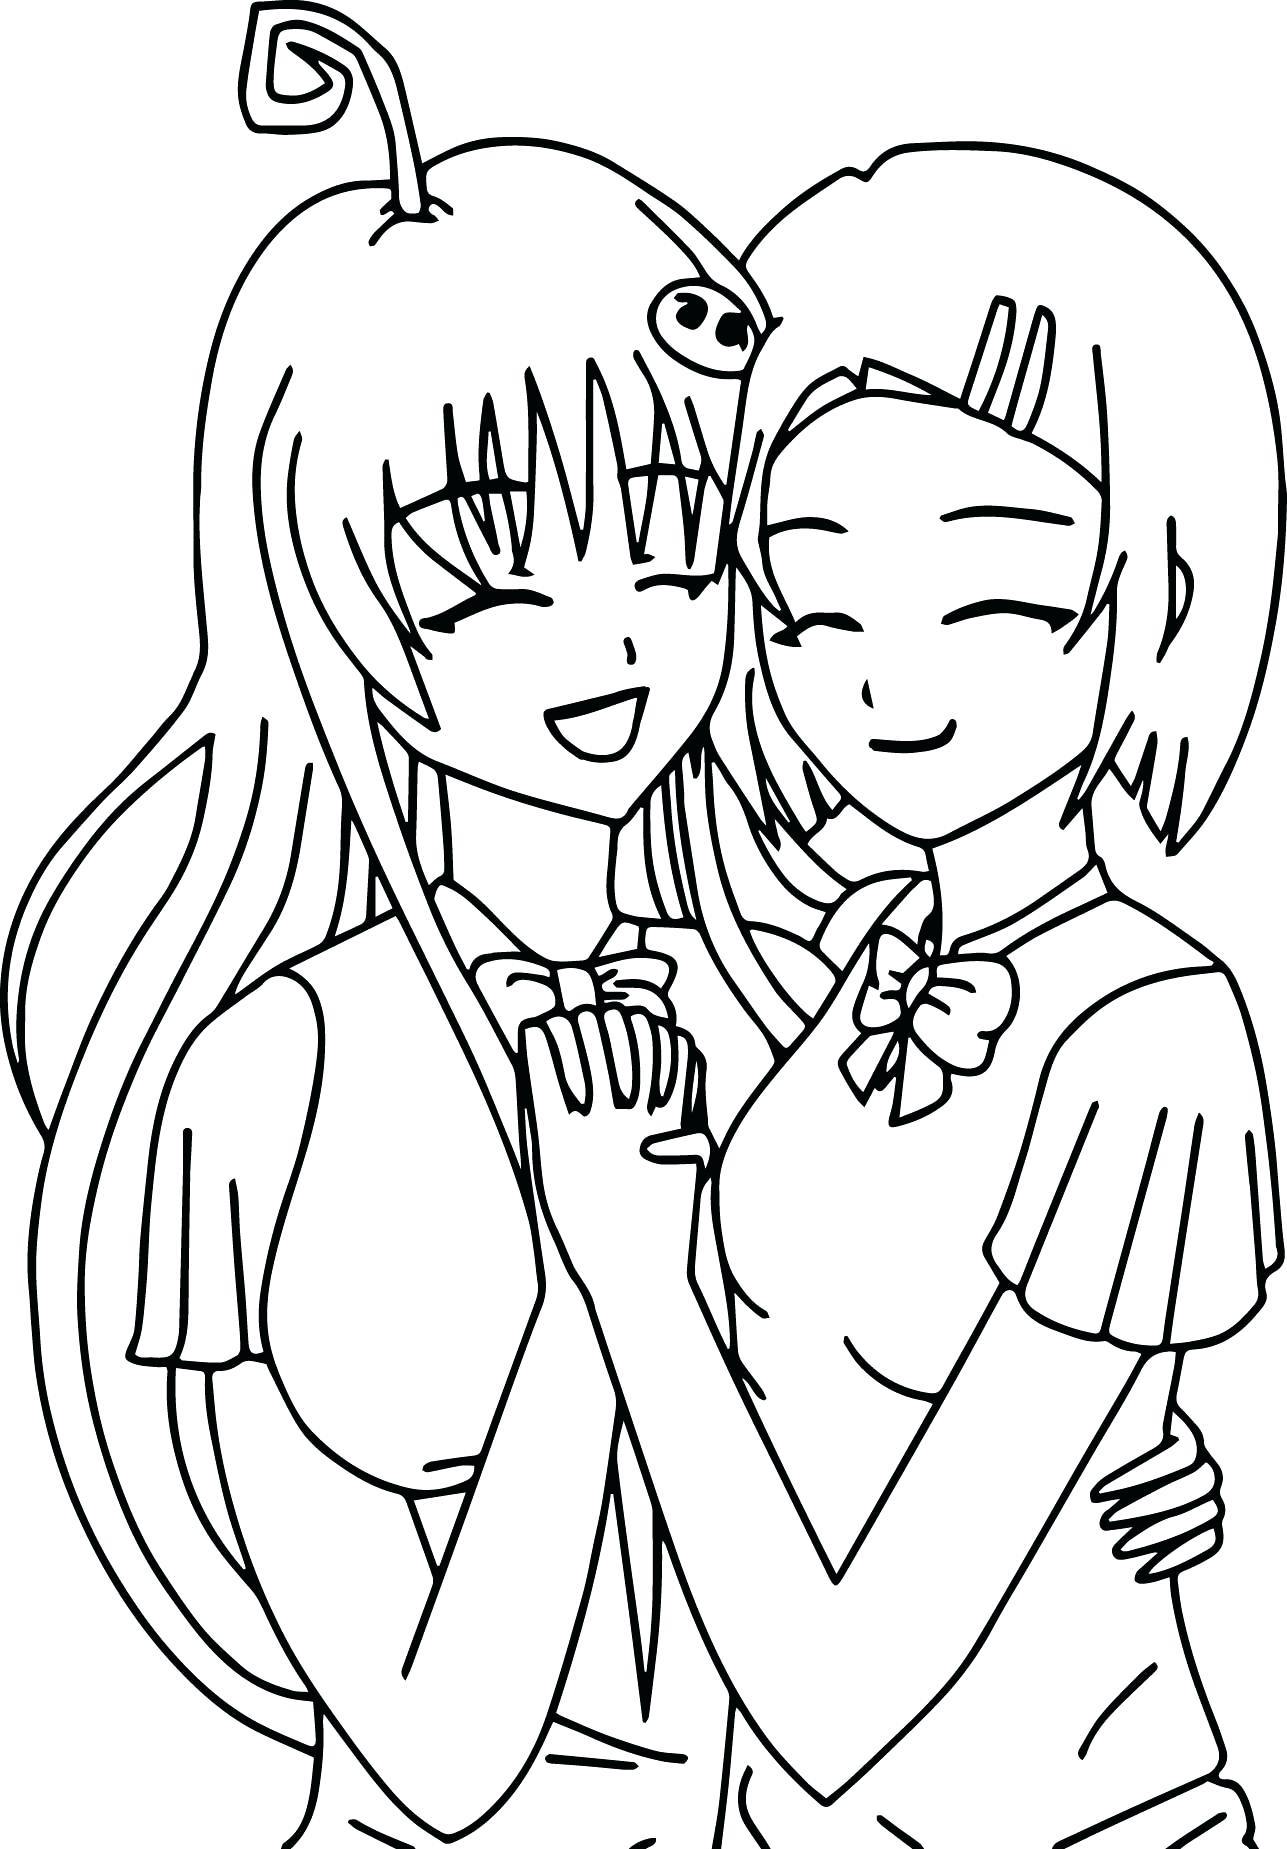 Best Friend Coloring Pages For Girls At Getcolorings.com | Free